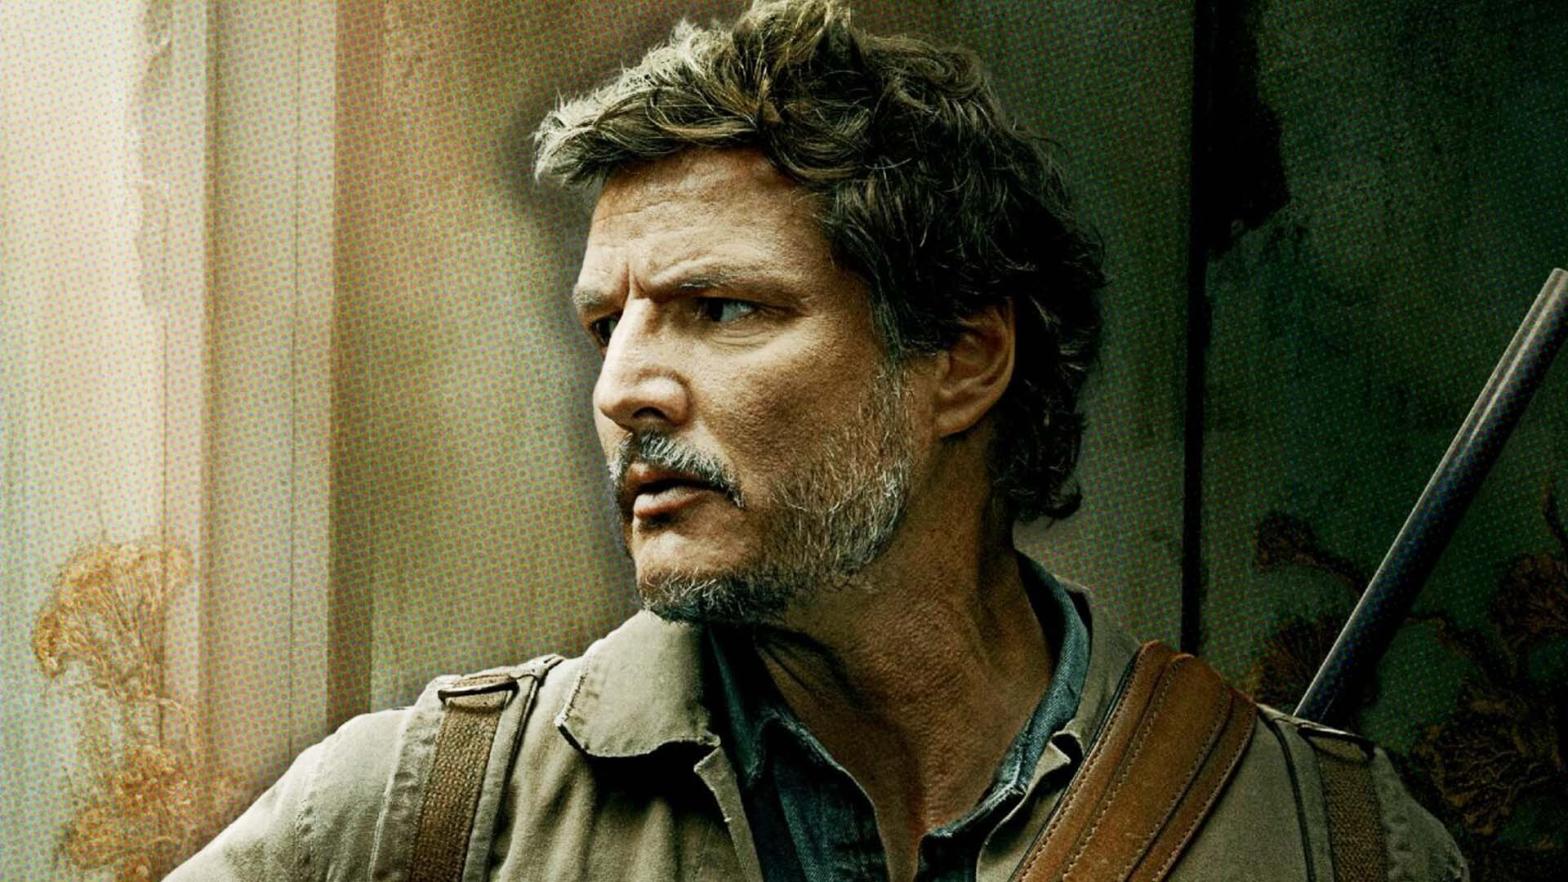 Joel (Pedro Pascal) from the upcoming HBO adaption of The Last of Us. (Screenshot: HBO / Sony)